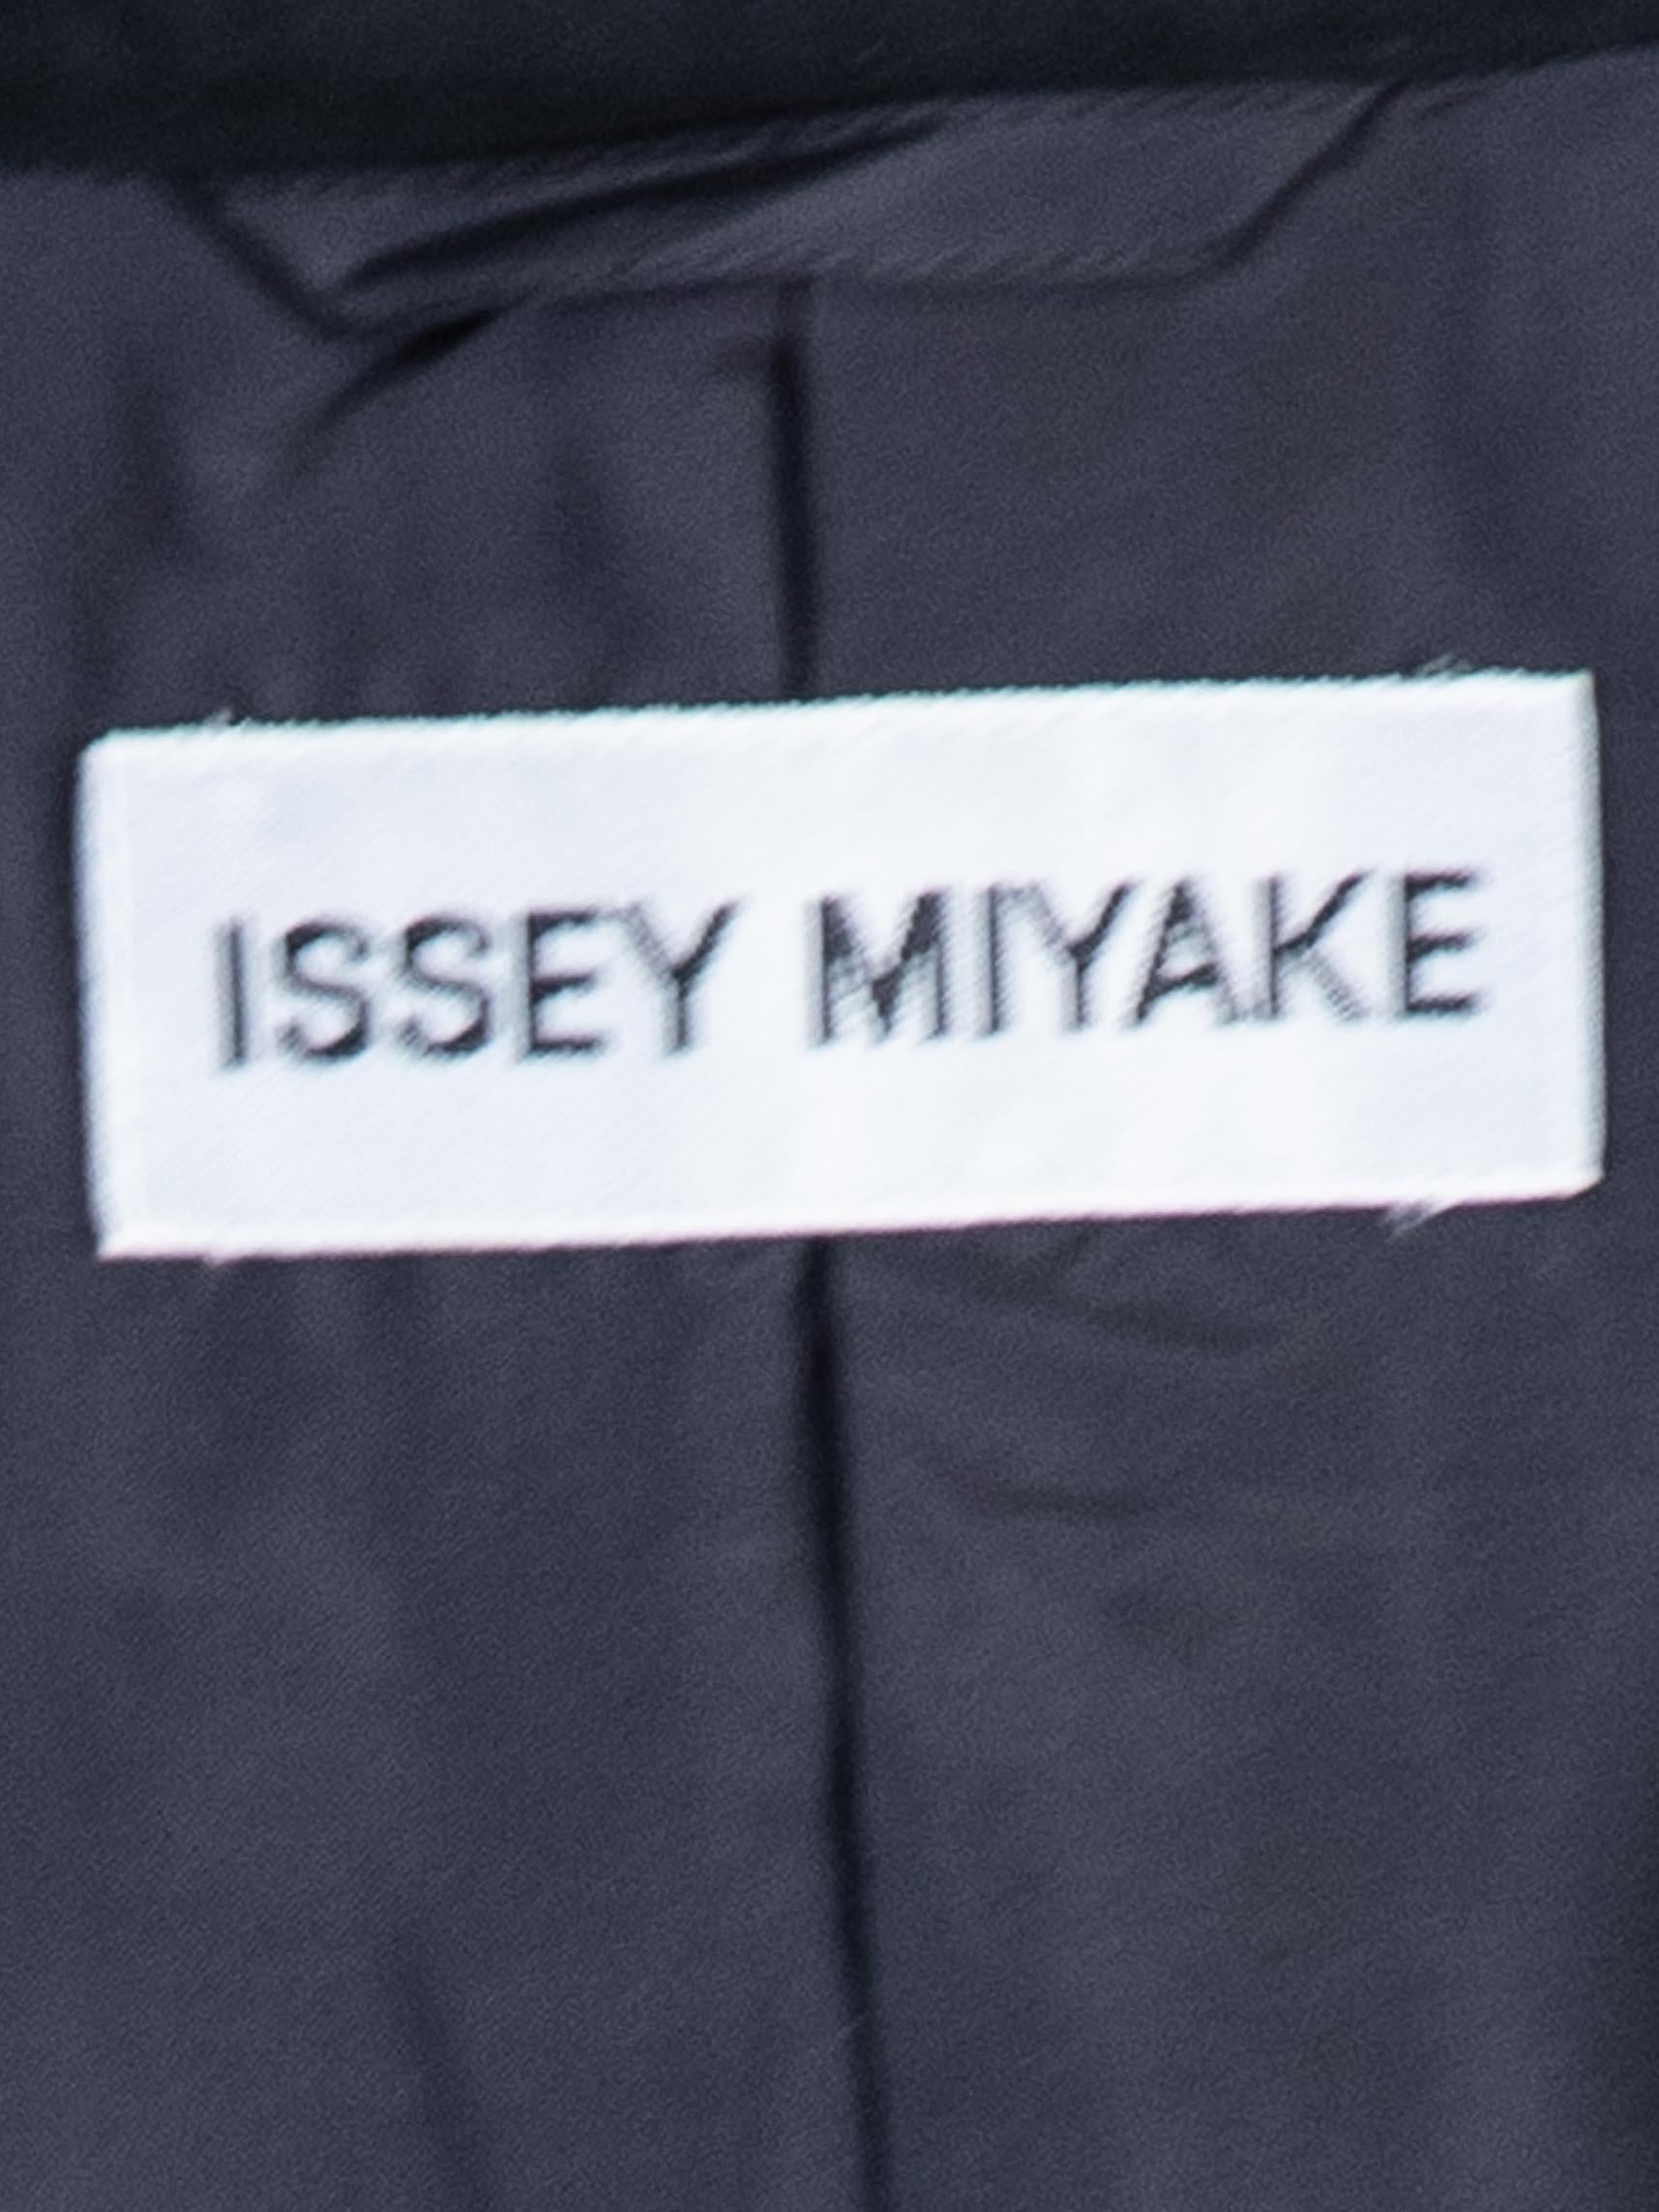 1990S ISSEY MIYAKE Black Rayon Blend Lightweight Pucker Double-Weave Pant Suit For Sale 7